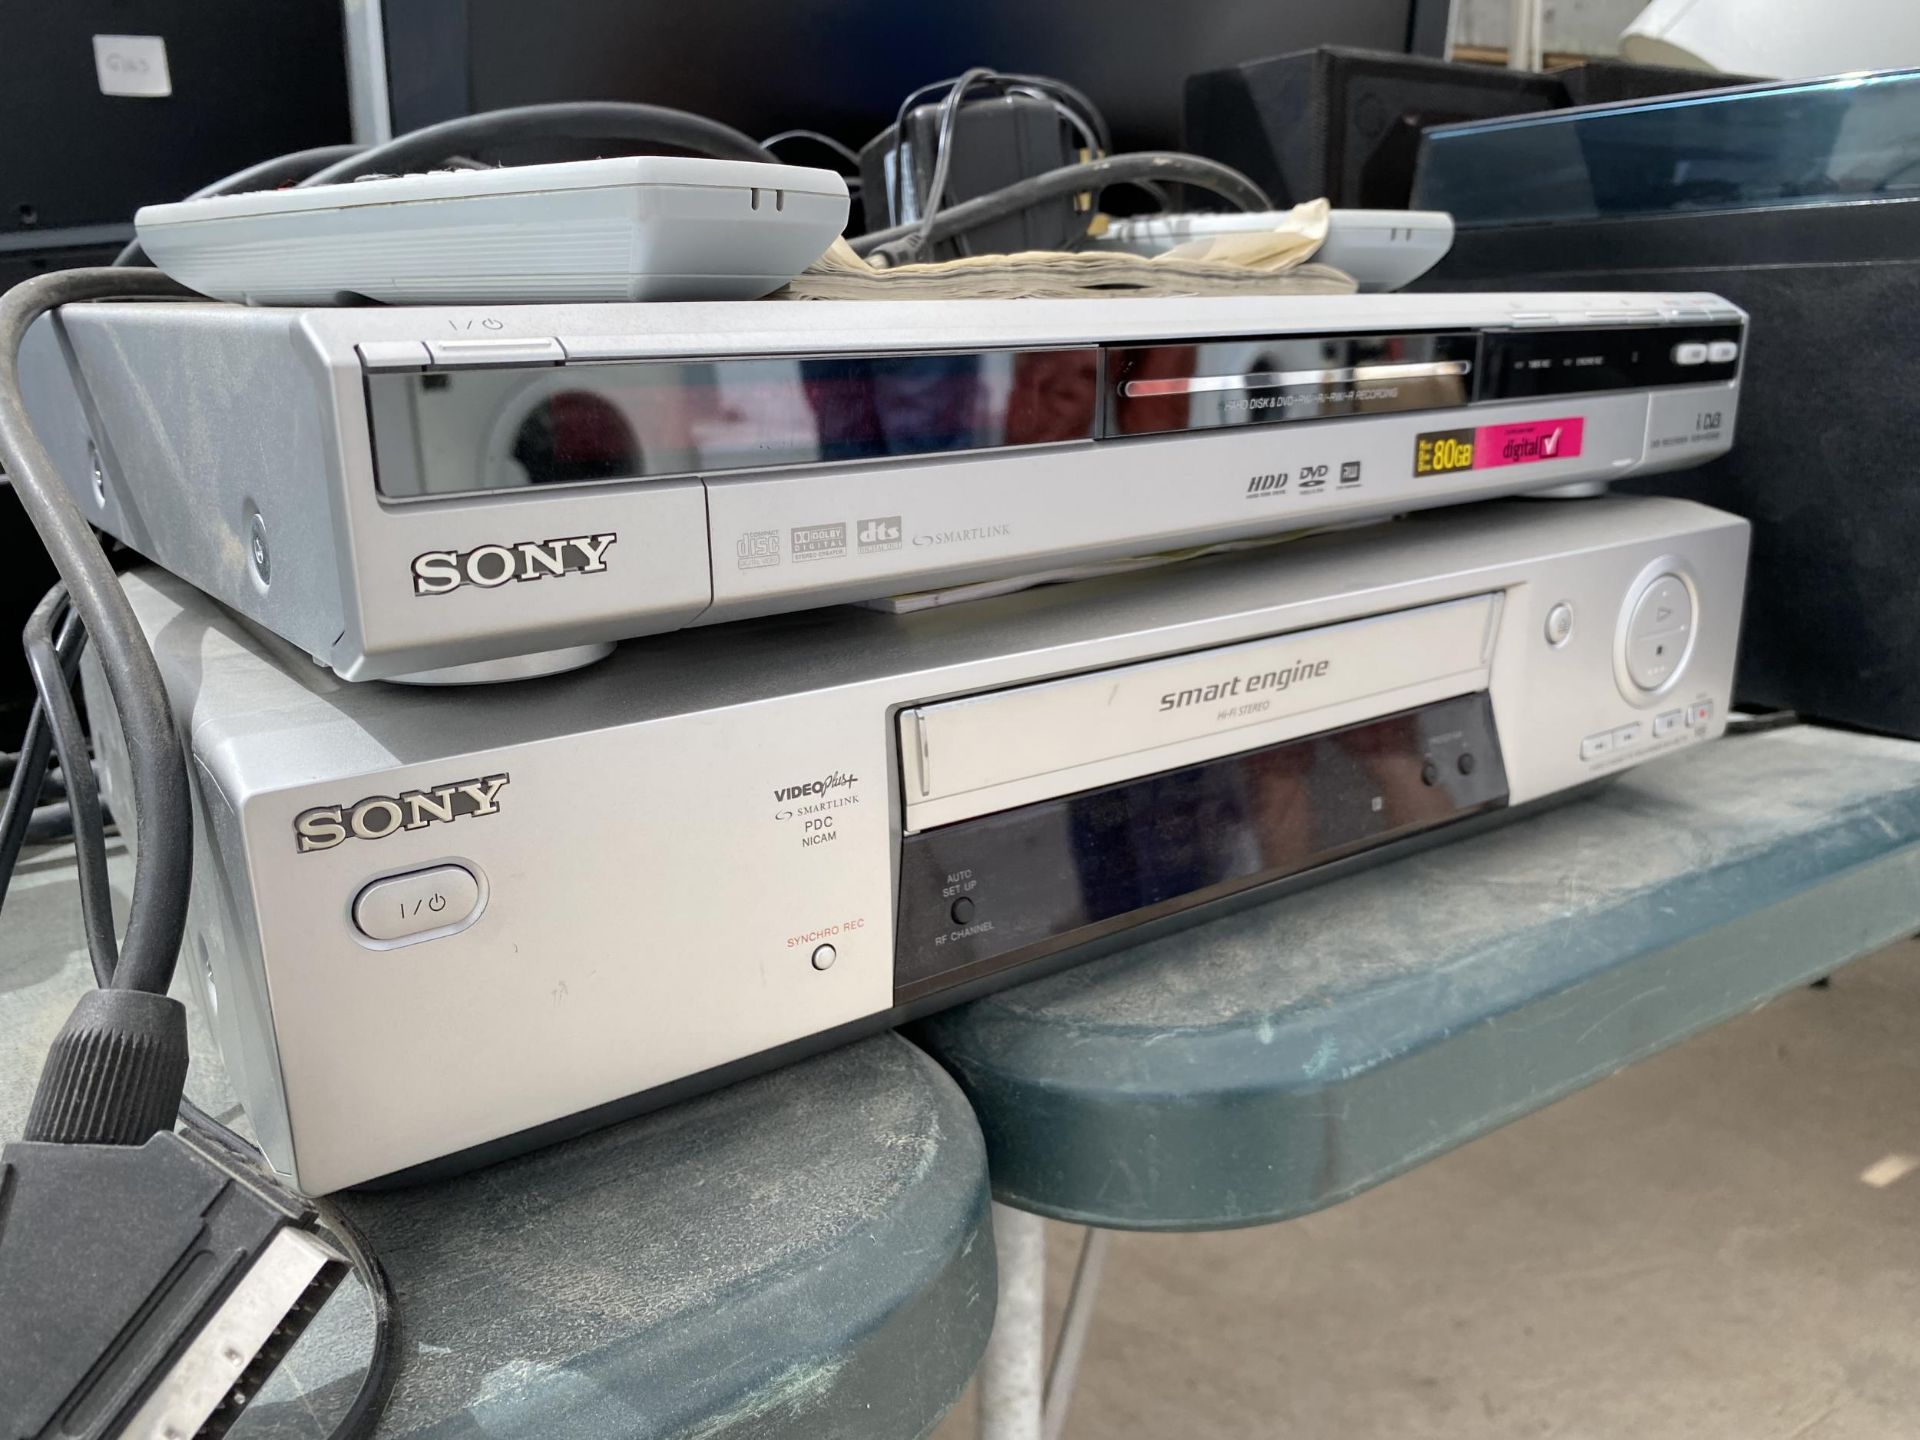 A SONY DVD PLAYER AND A SONY VHS PLAYER - Image 2 of 2